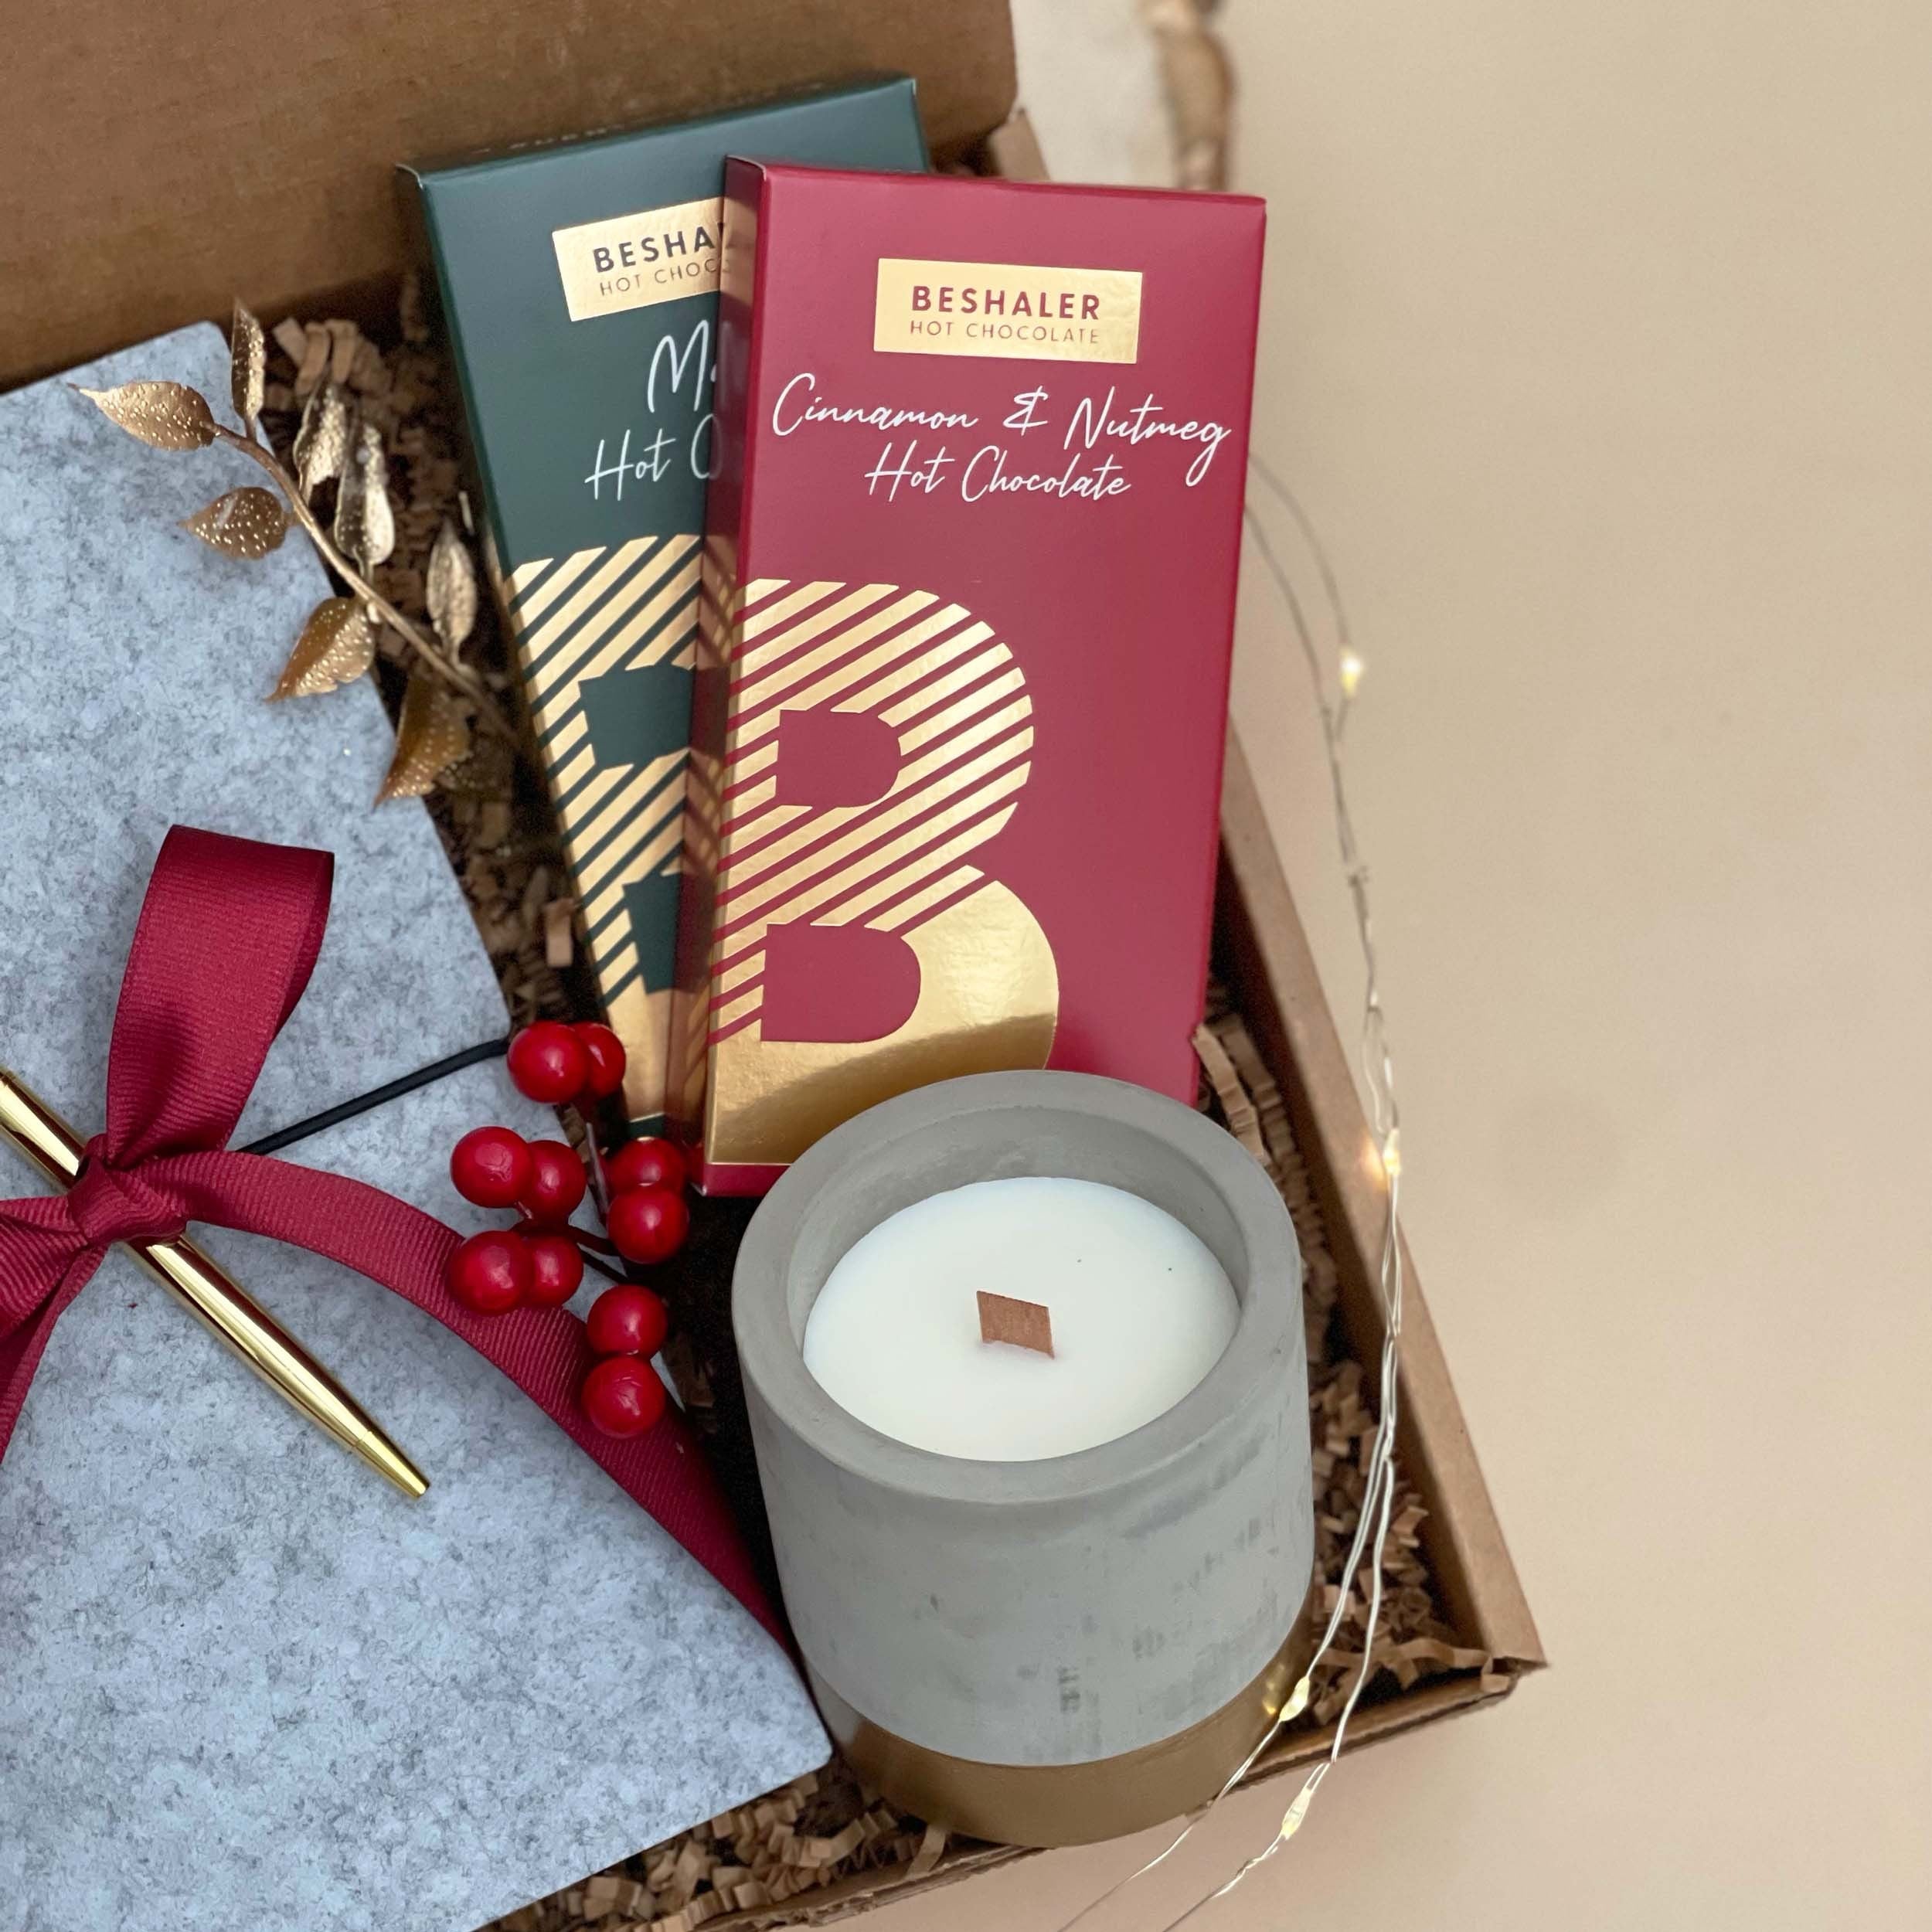 Hyperfoods Christmas Gifts For Family and Friends Christmas Gift for Kids  Basket For Family New Year Gifts Corporate Christmas Gifts New Year Gifts  Christmas Candles Pack 4 Gift Hamper For Christmas :